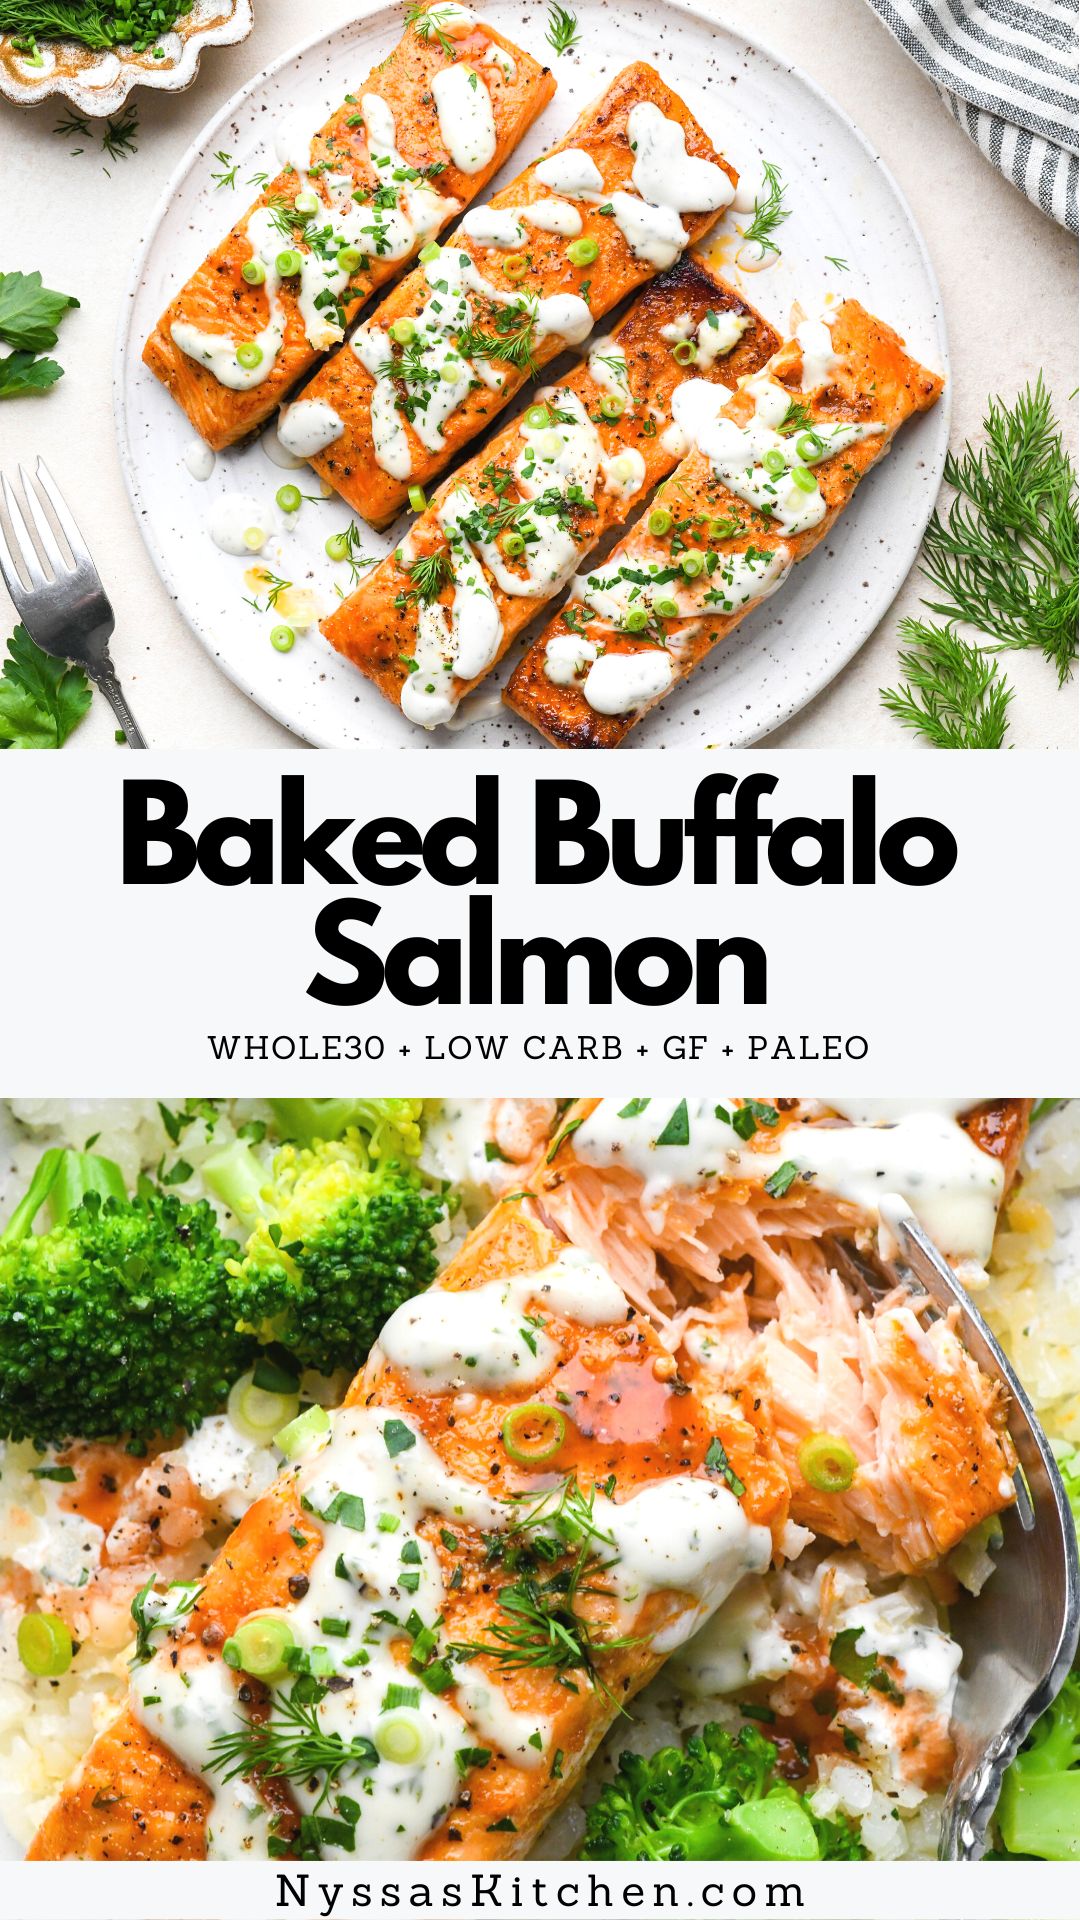 This baked buffalo salmon is a delightfully flavorful and healthy protein that's easy enough to make any night of the week! It's marinated quickly in a simple make-at-home buffalo sauce and baked in the oven until perfectly cooked - flaky and moist! Paleo, Whole30, GF, keto friendly, low carb, and dairy free.